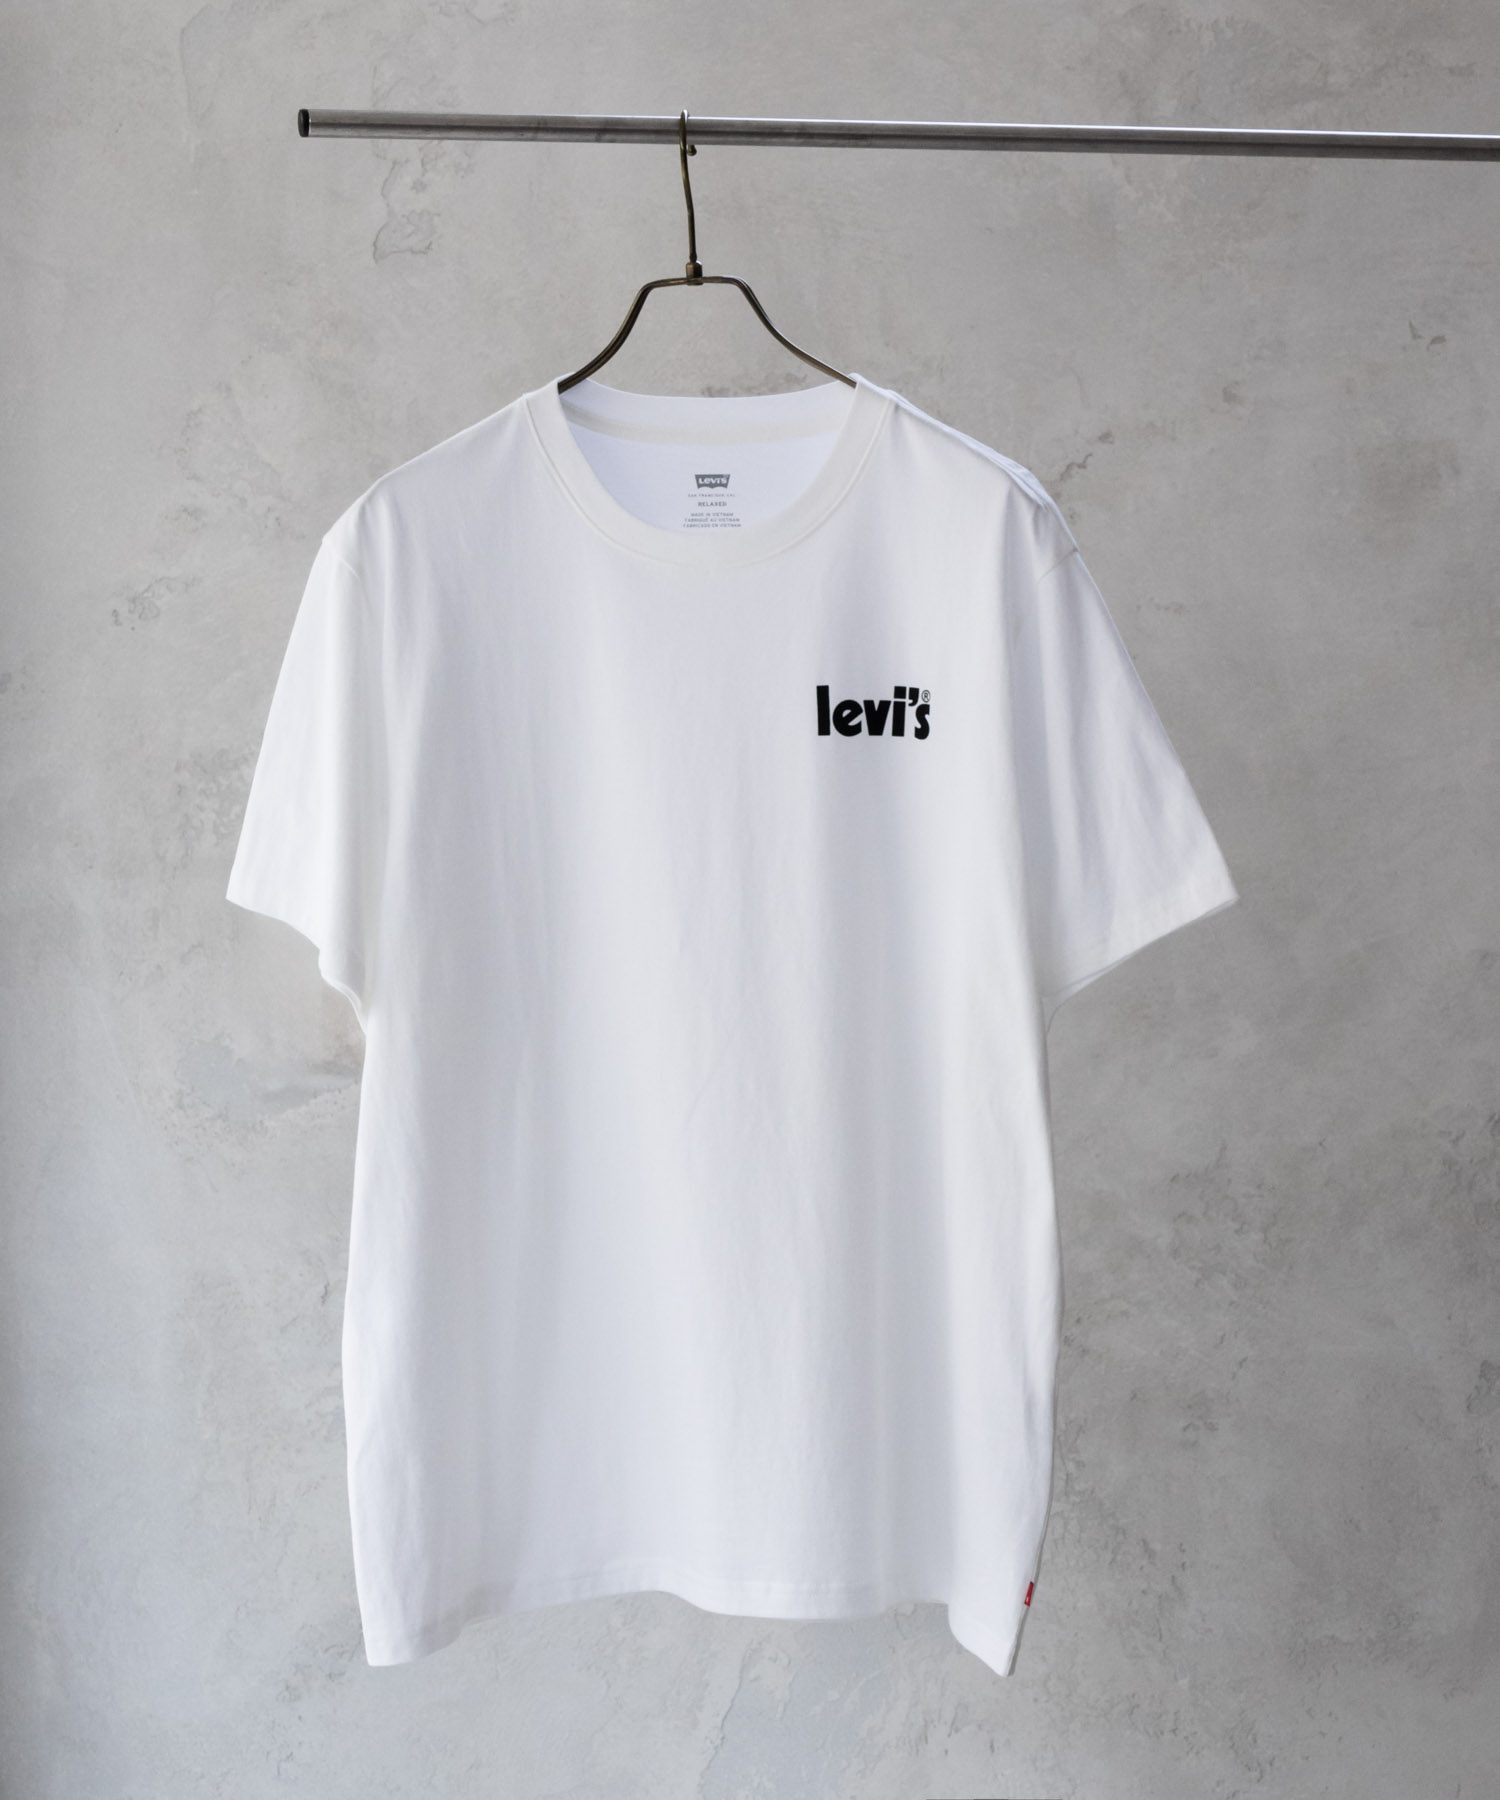 Levi&apos;s リーバイス Tシャツ RELAXED FIT メンズ 綿100％ コットン 半袖 クル...